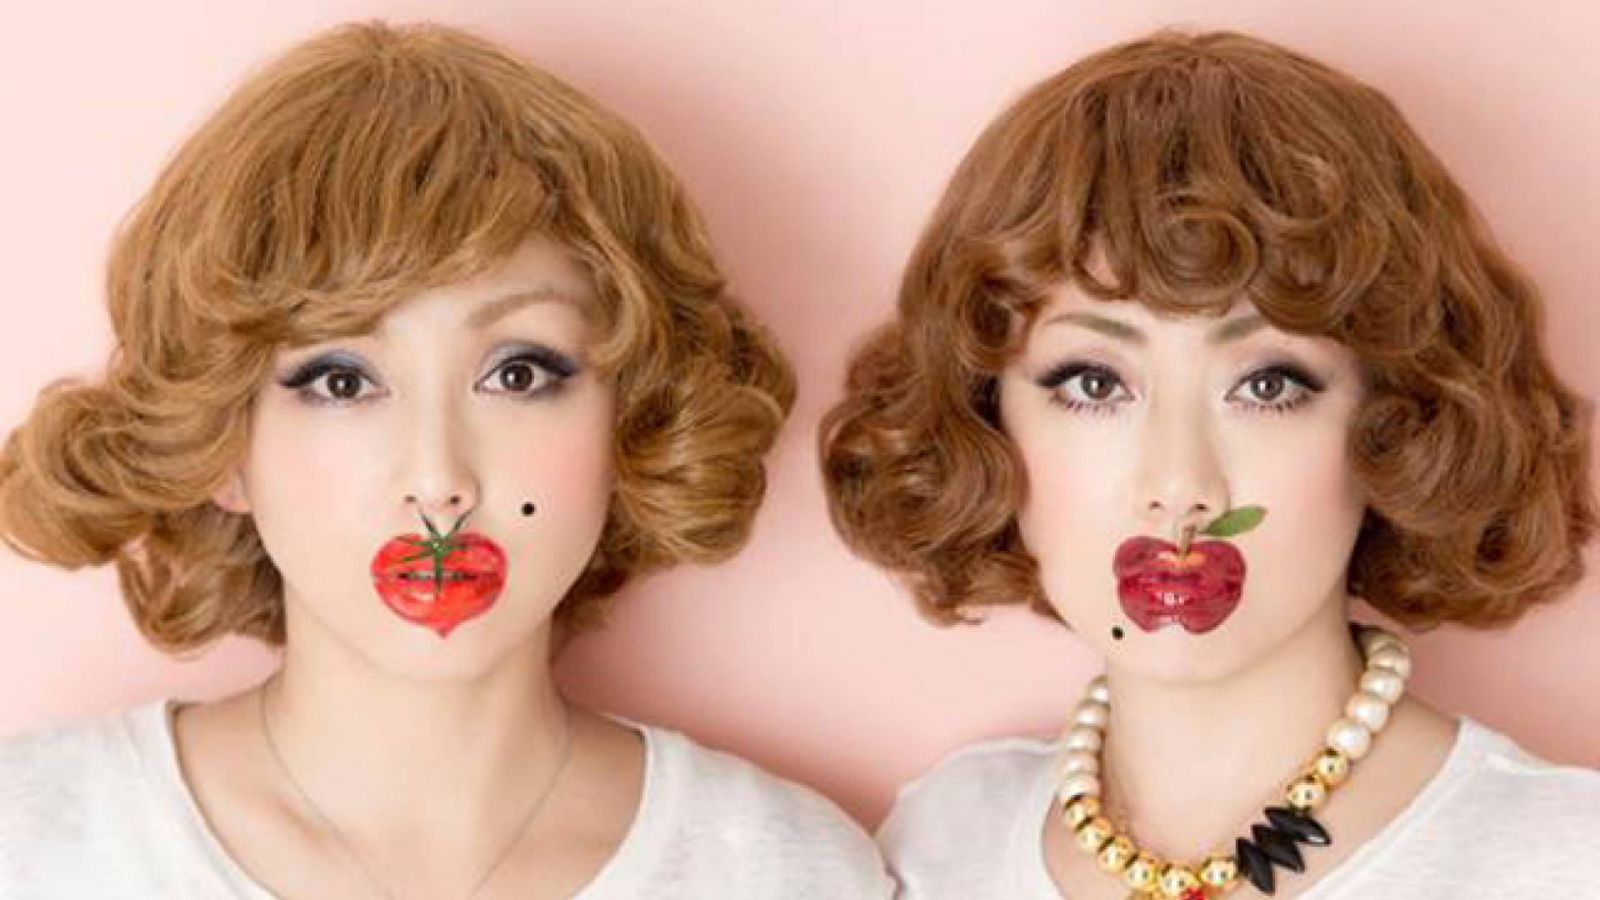 Puffy AmiYumi to Perform Several Shows in the USA © Puffy AmiYumi. All rights reserved.